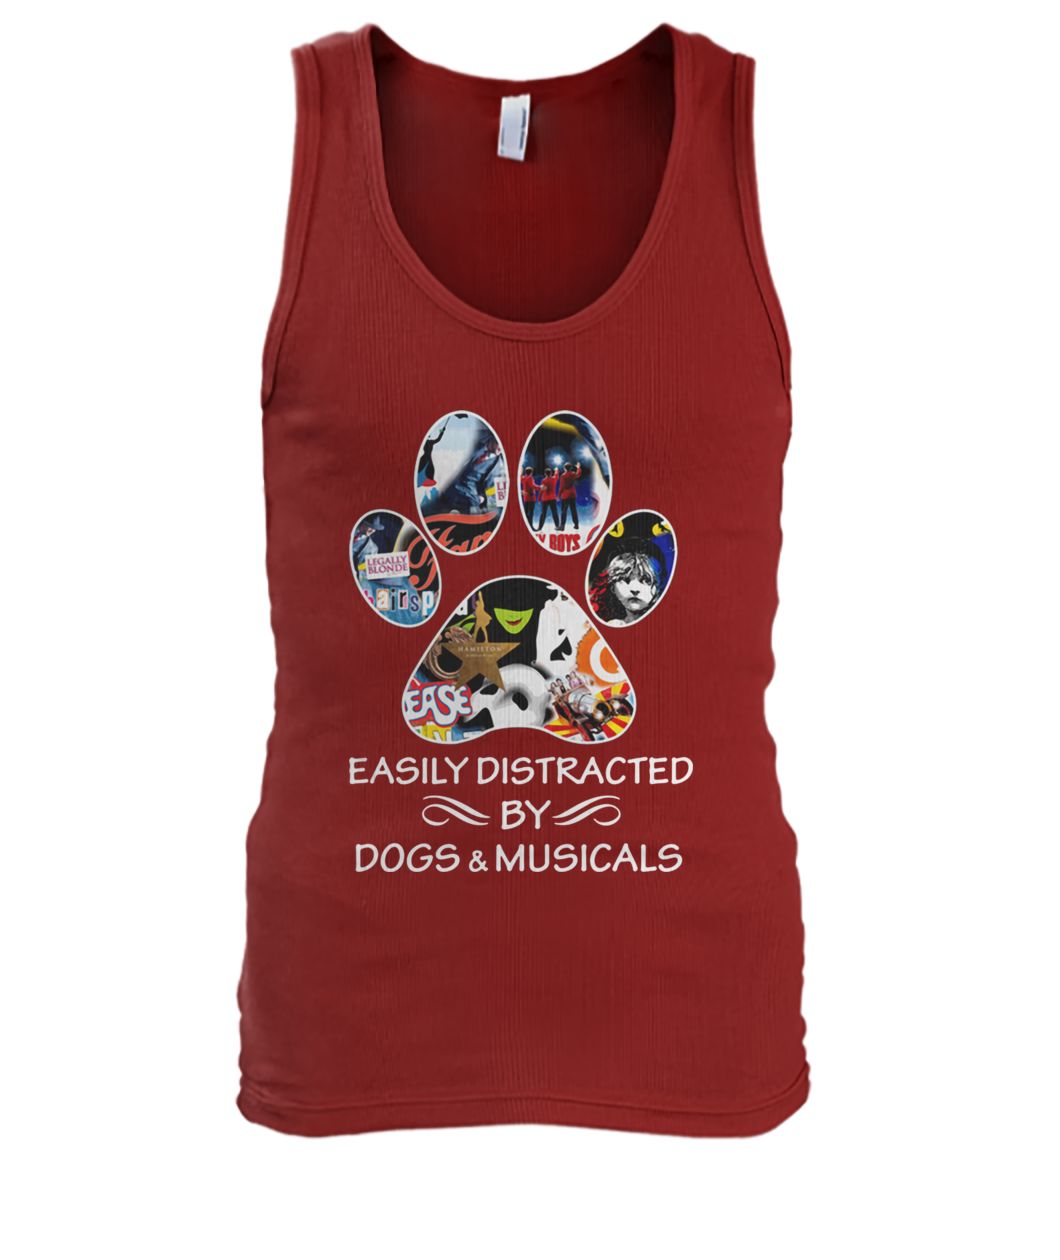 Broadway easily distracted by dogs and musicals men's tank top